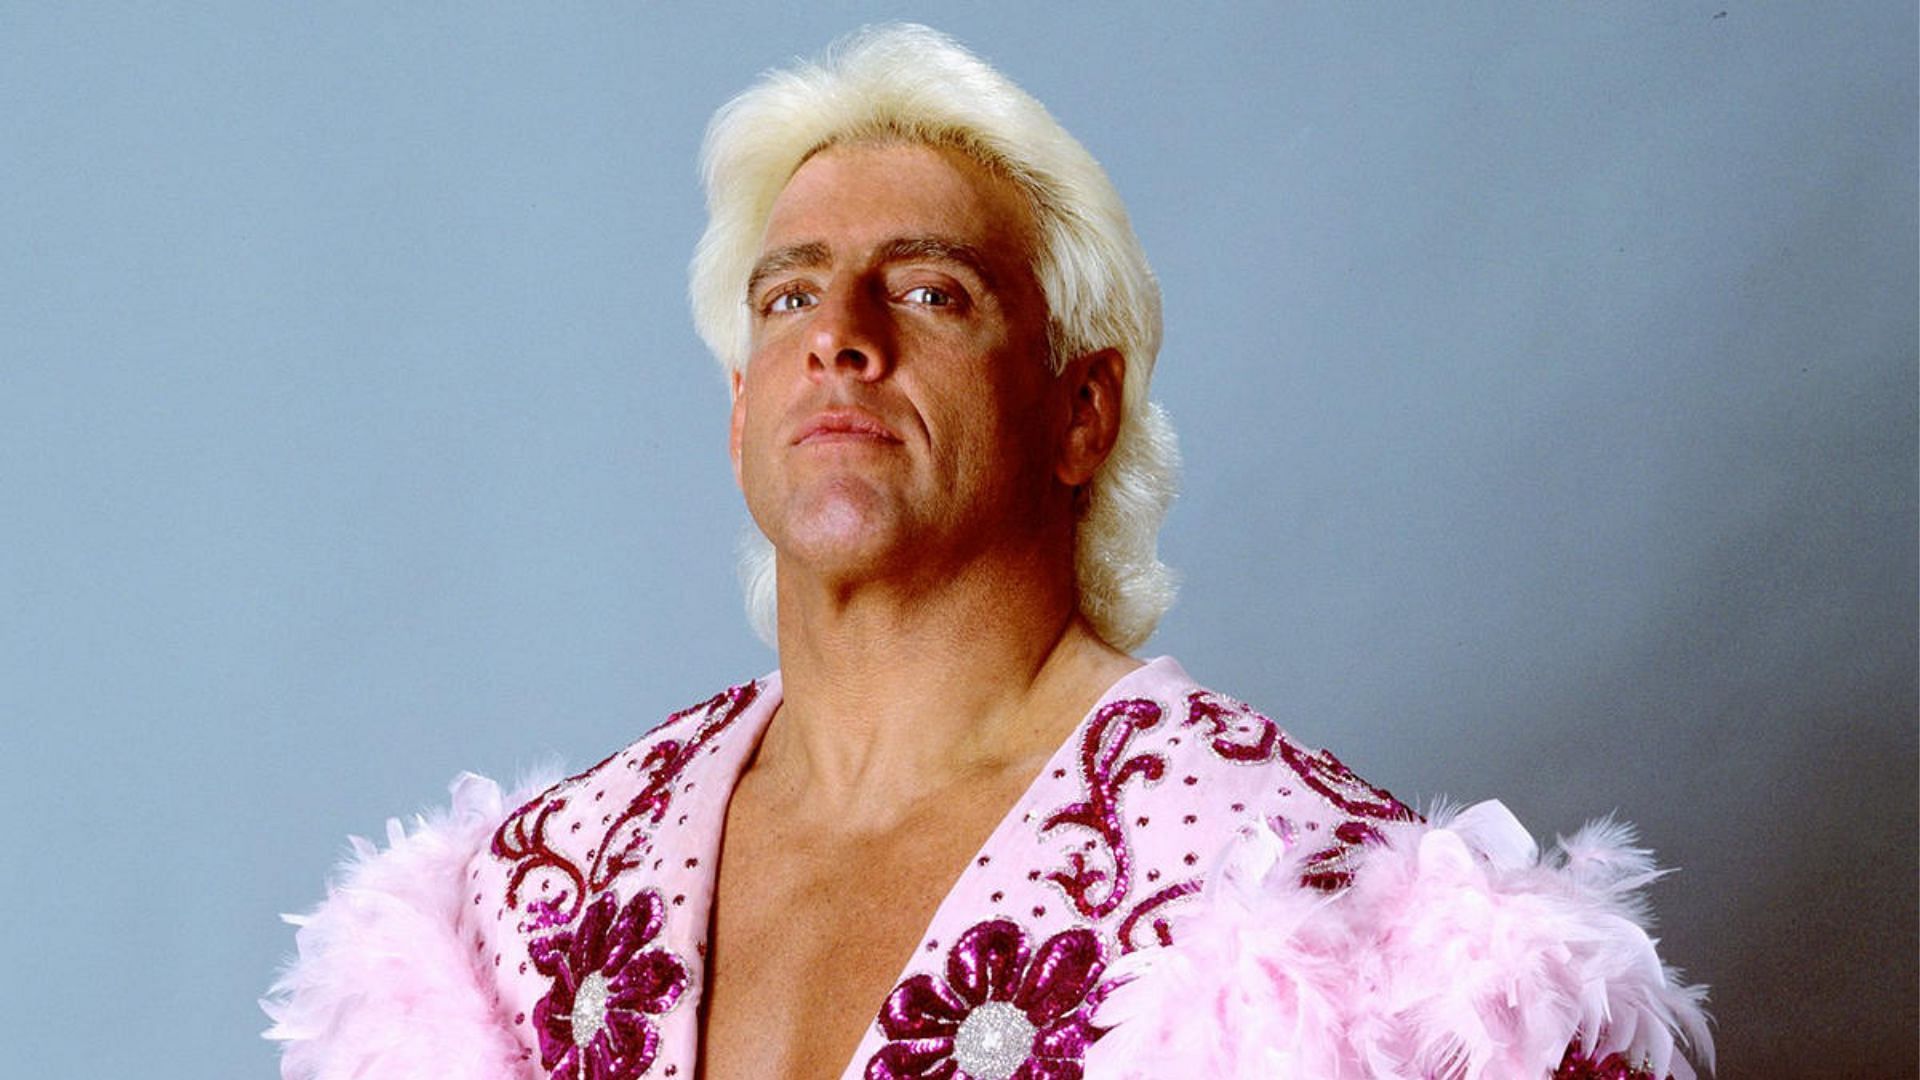 Ric Flair itching to wrestle again, and eager to face WWE Hall of Famer